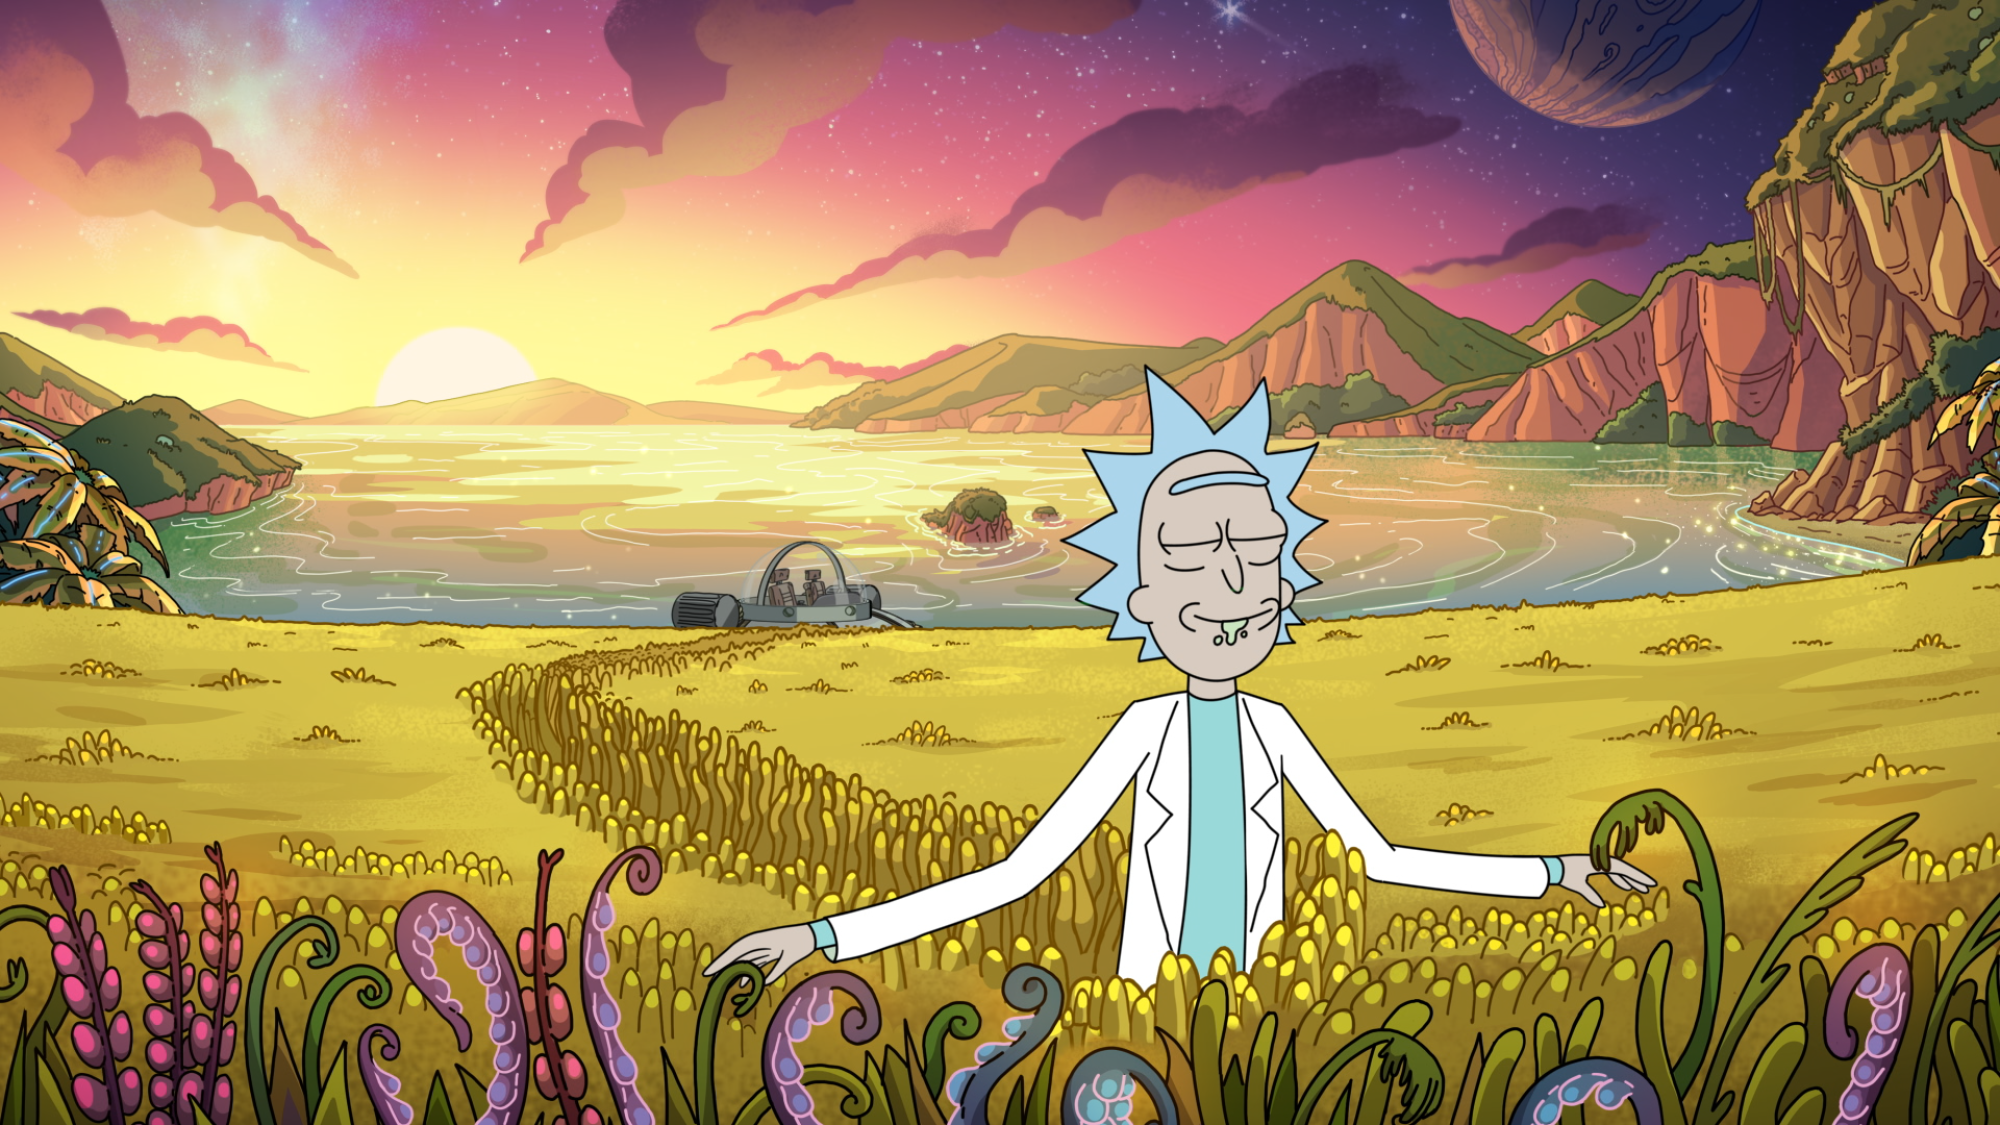 A scene from "Rick and Morty"